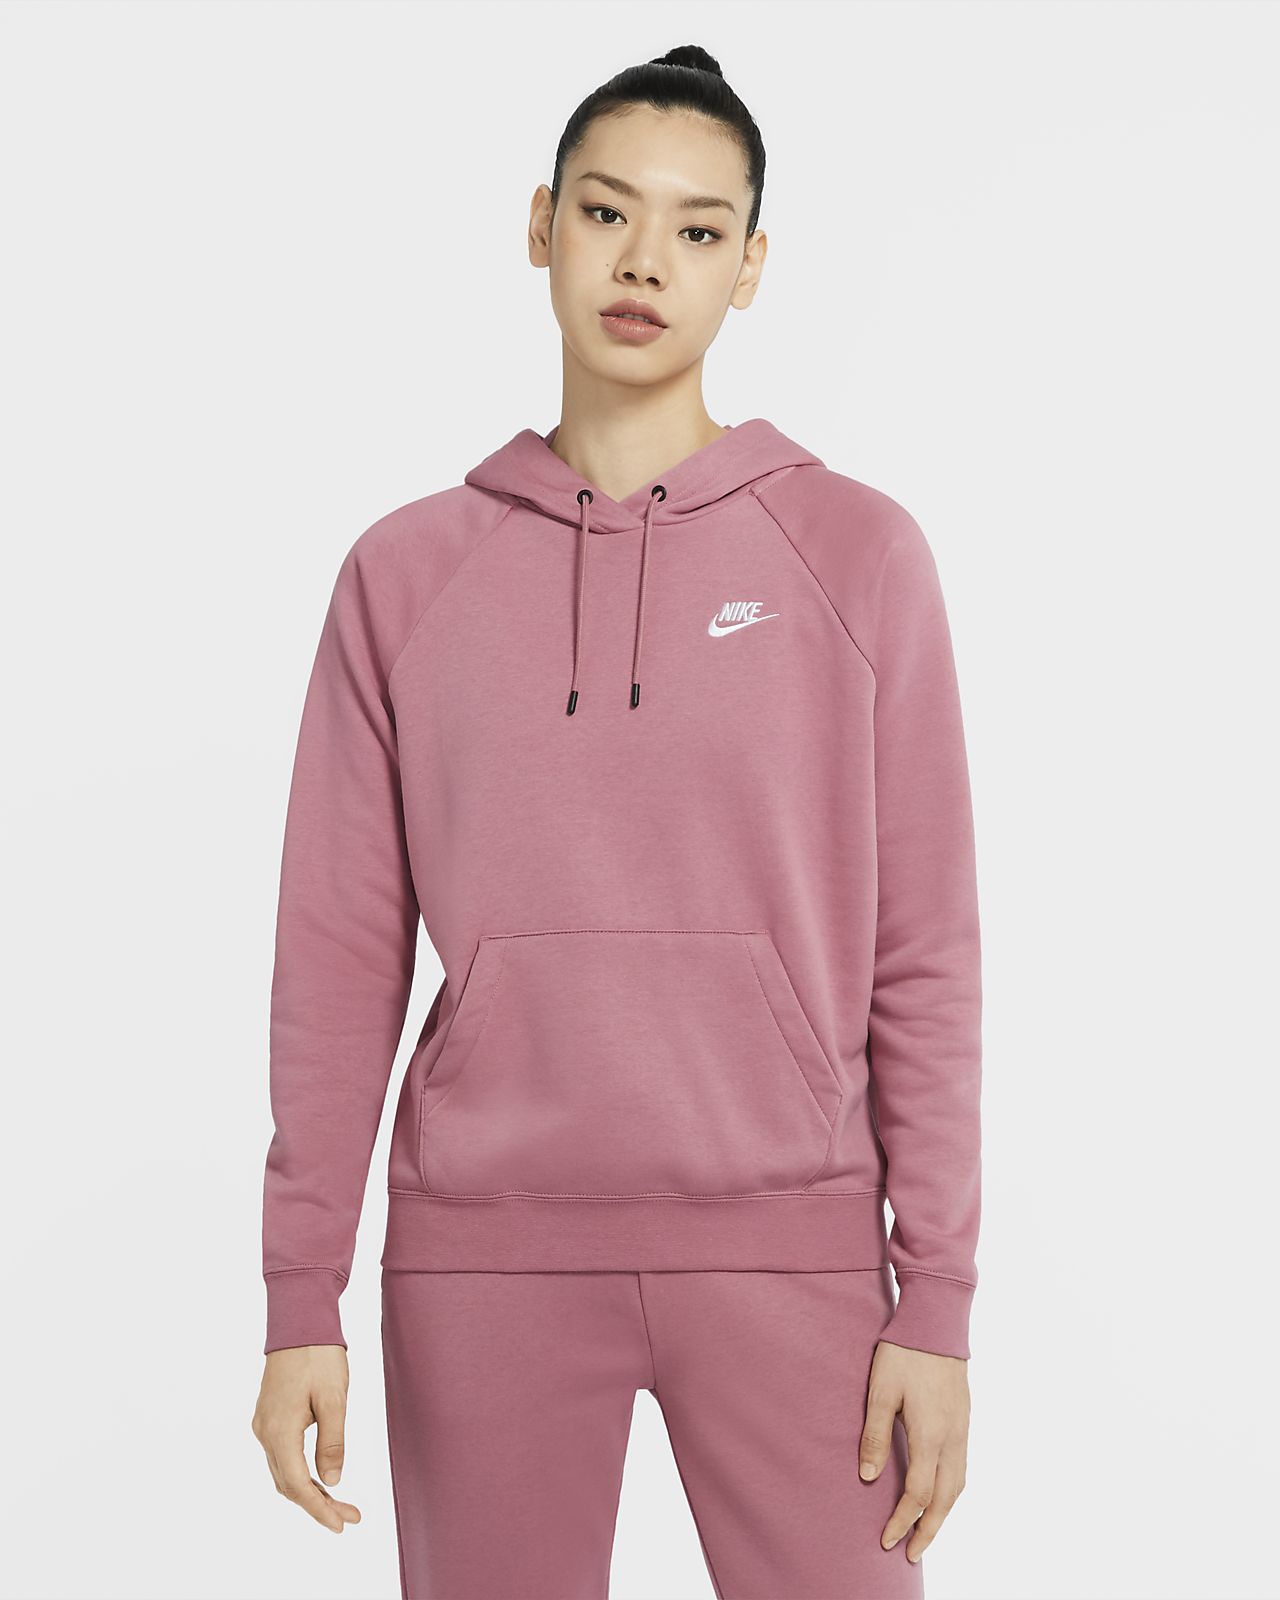 Nike Sportswear Essential Womens Fleece Pullover Hoodie | Images and ...